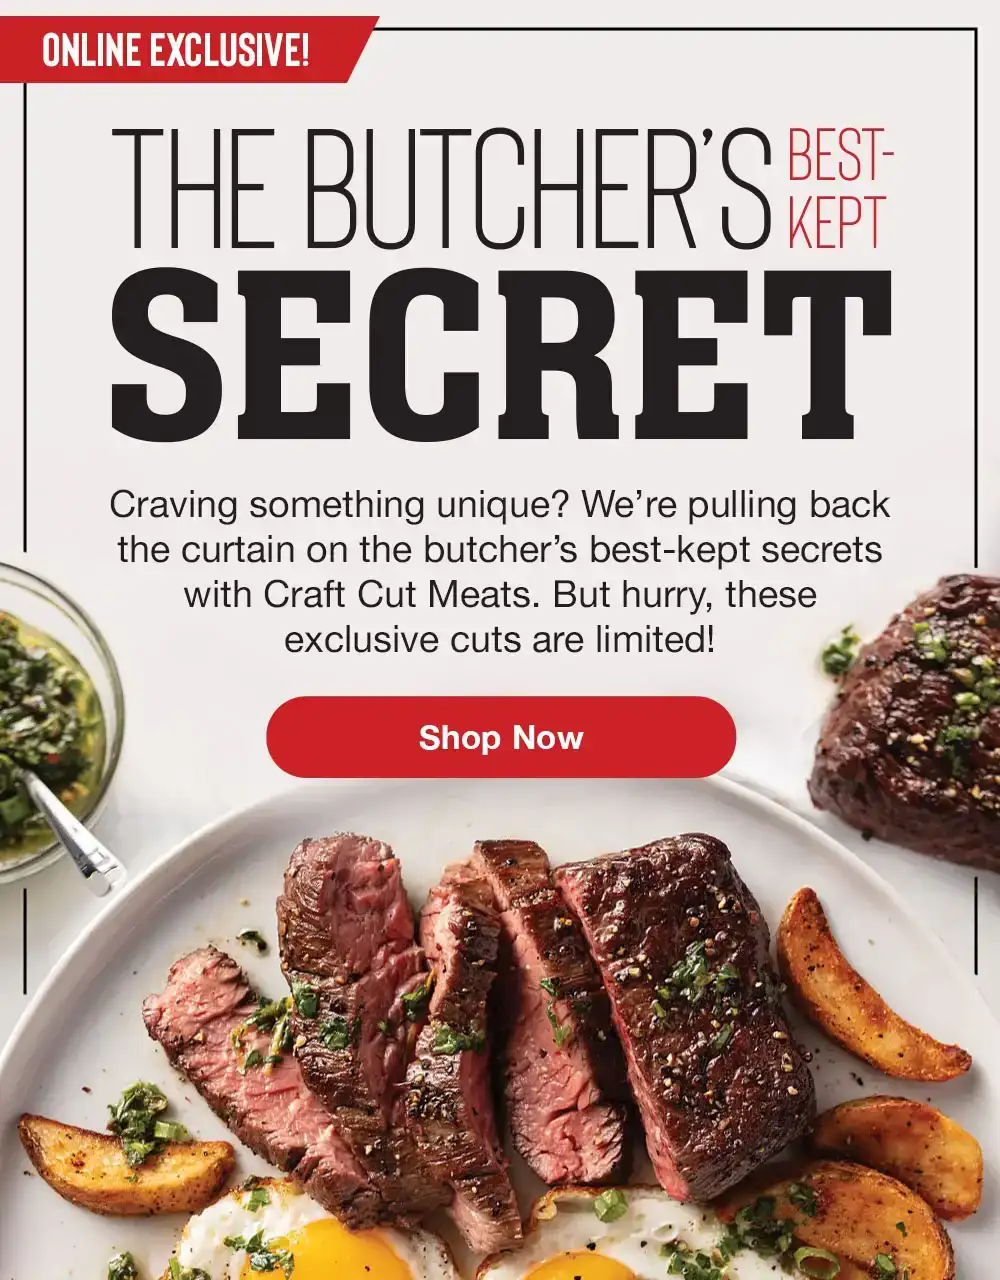 THE BUTCHER'S BEST-KEPT SECRET | Craving something unique? We're pulling back the curtain on the butcher's best-kept secrets with Craft Cut Meats. But hurry, these exclusive cuts are limited! || SHOP NOW